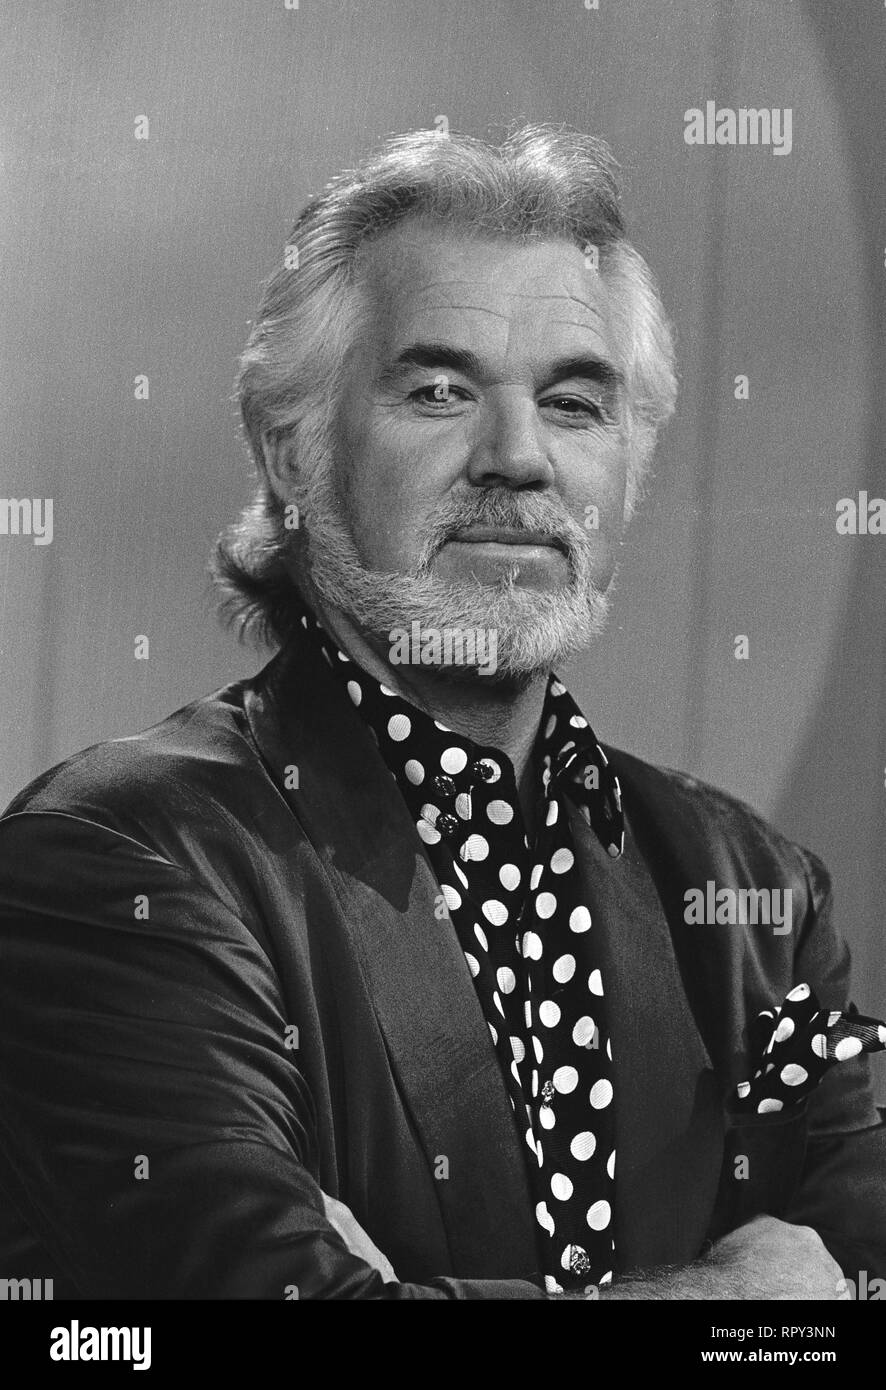 KENNY ROGERS / KENNY ROGERS 326012 / Überschrift : Kenny Rogers Banque D'Images